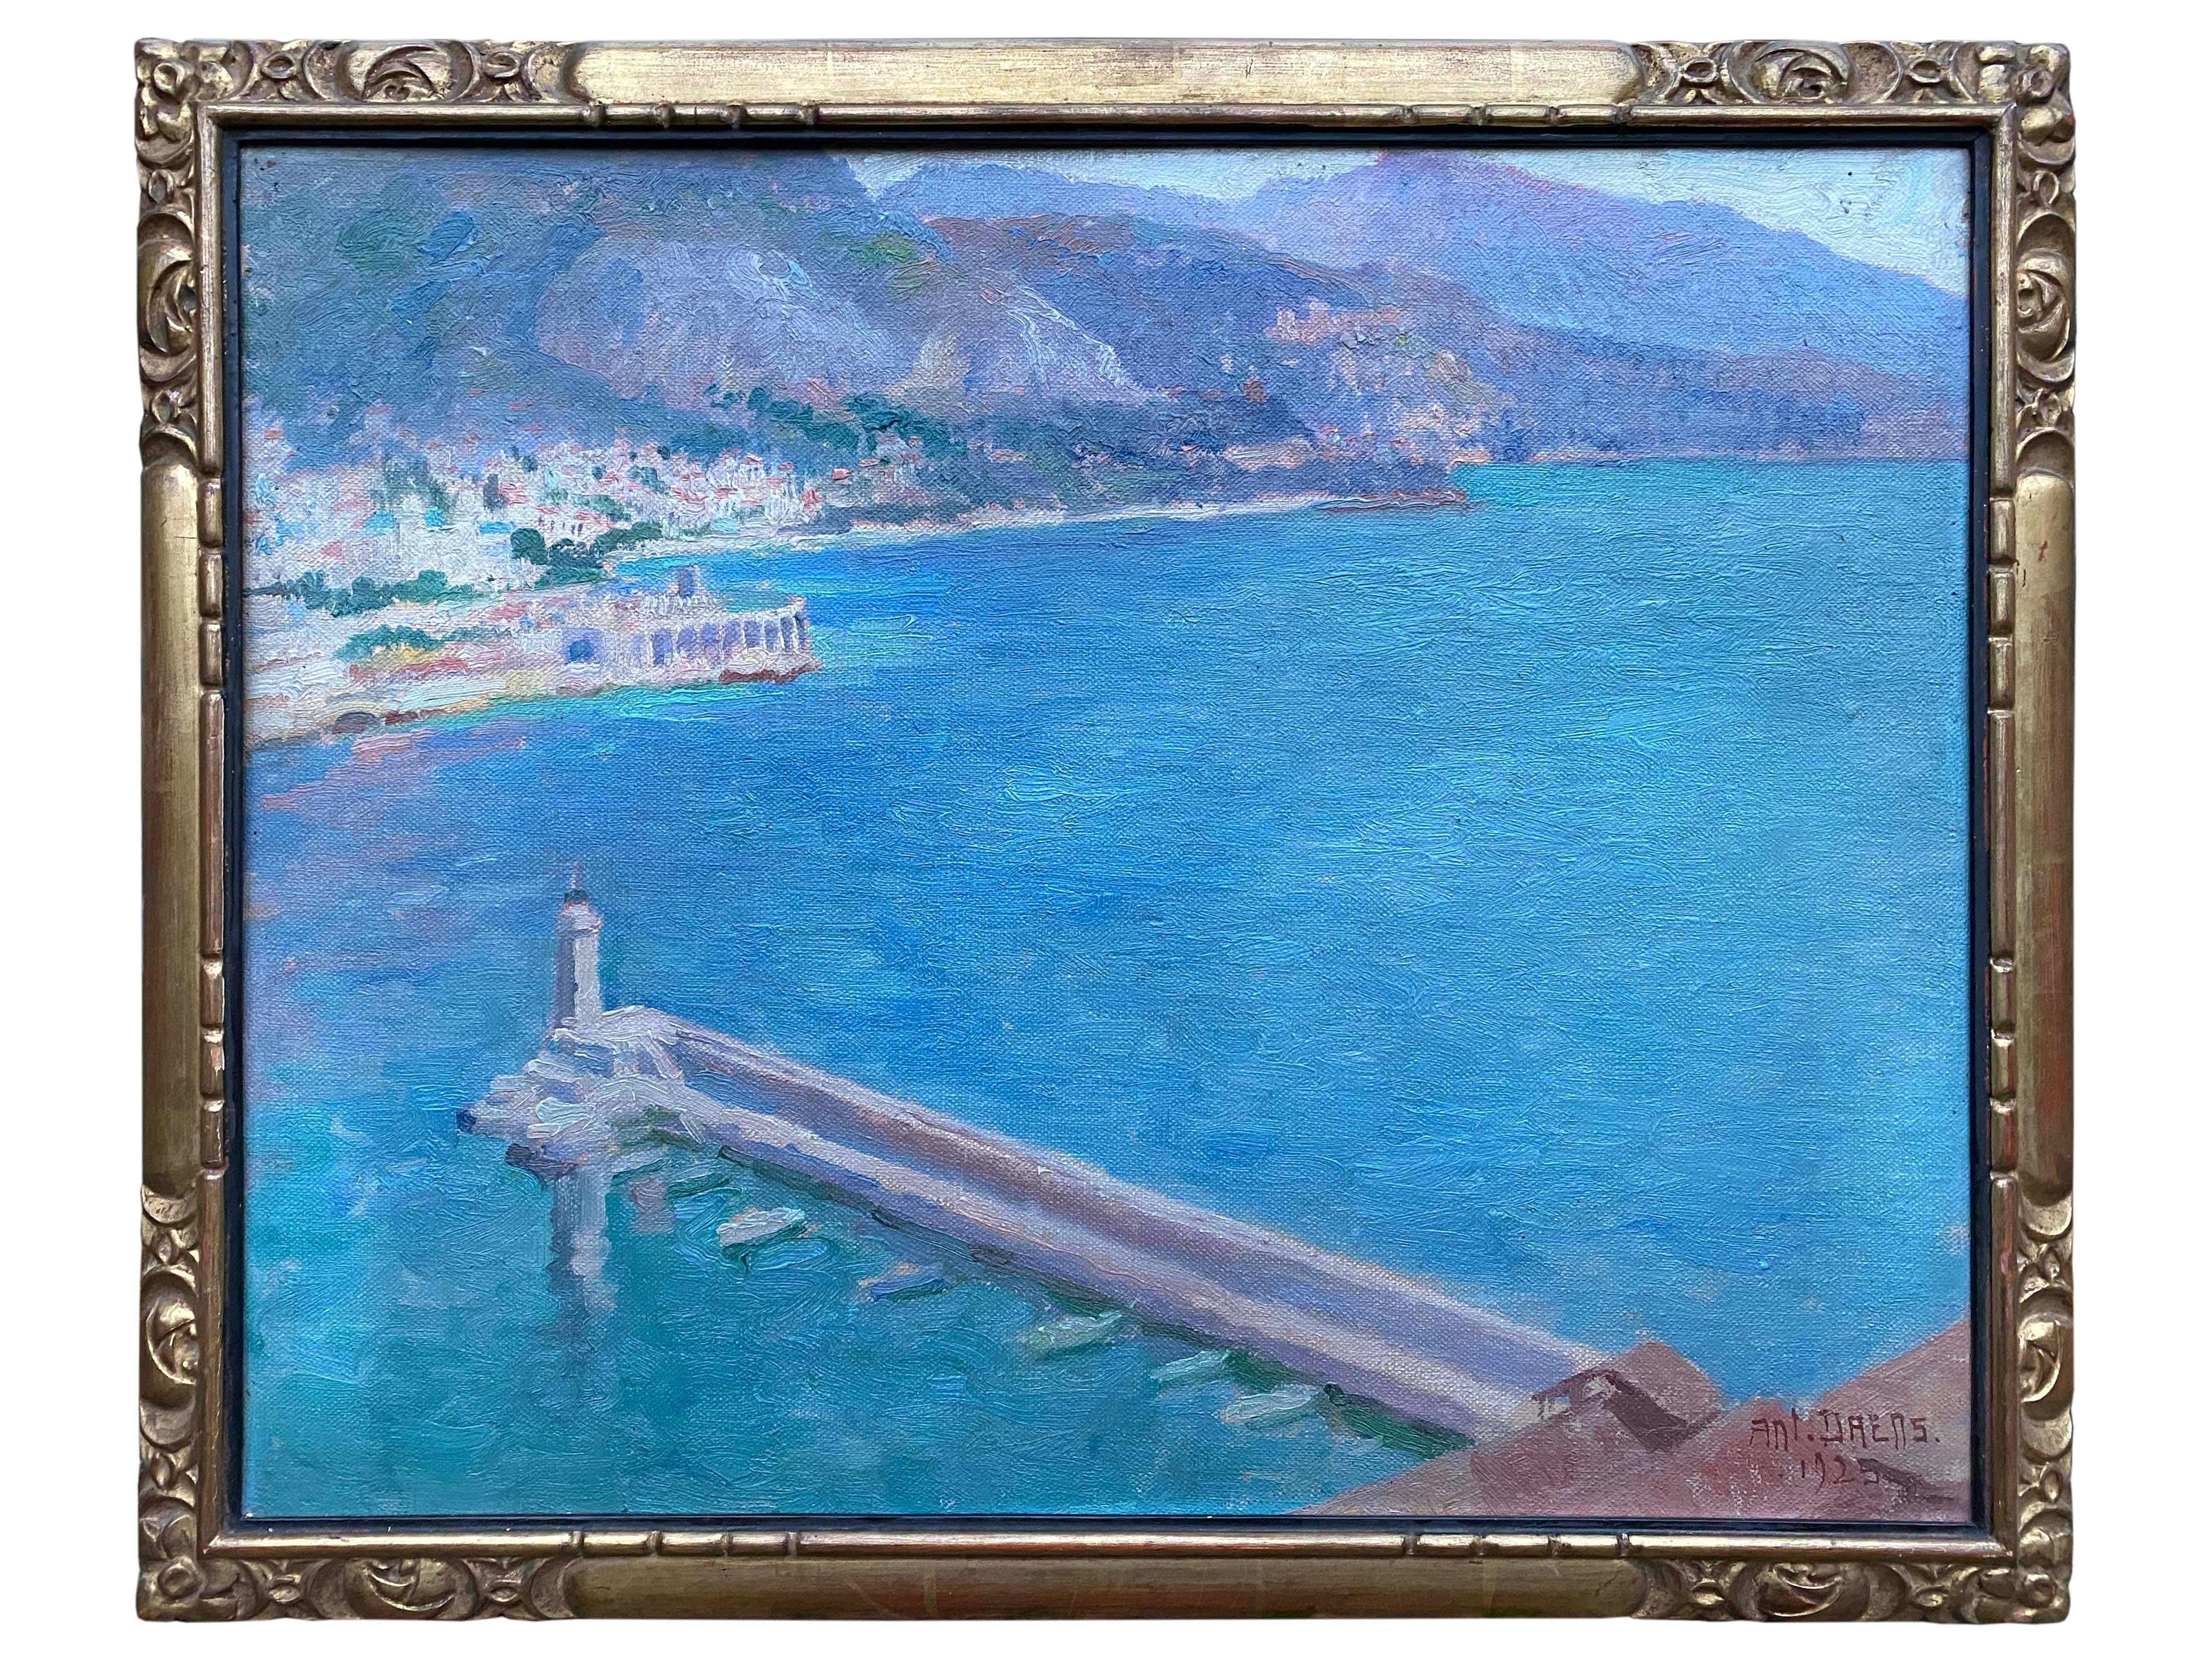 Seascape with Pier and Lighthouse of Monaco Harbour

Daens Antoine
Brussels 1871 – 1946
Belgian Painter
Signature: Signed bottom right

Medium: Oil on canvas
Dimensions: Image size 37 x 46 cm, frame size 42 x 51 cm

Biography: Daens Antoine was an